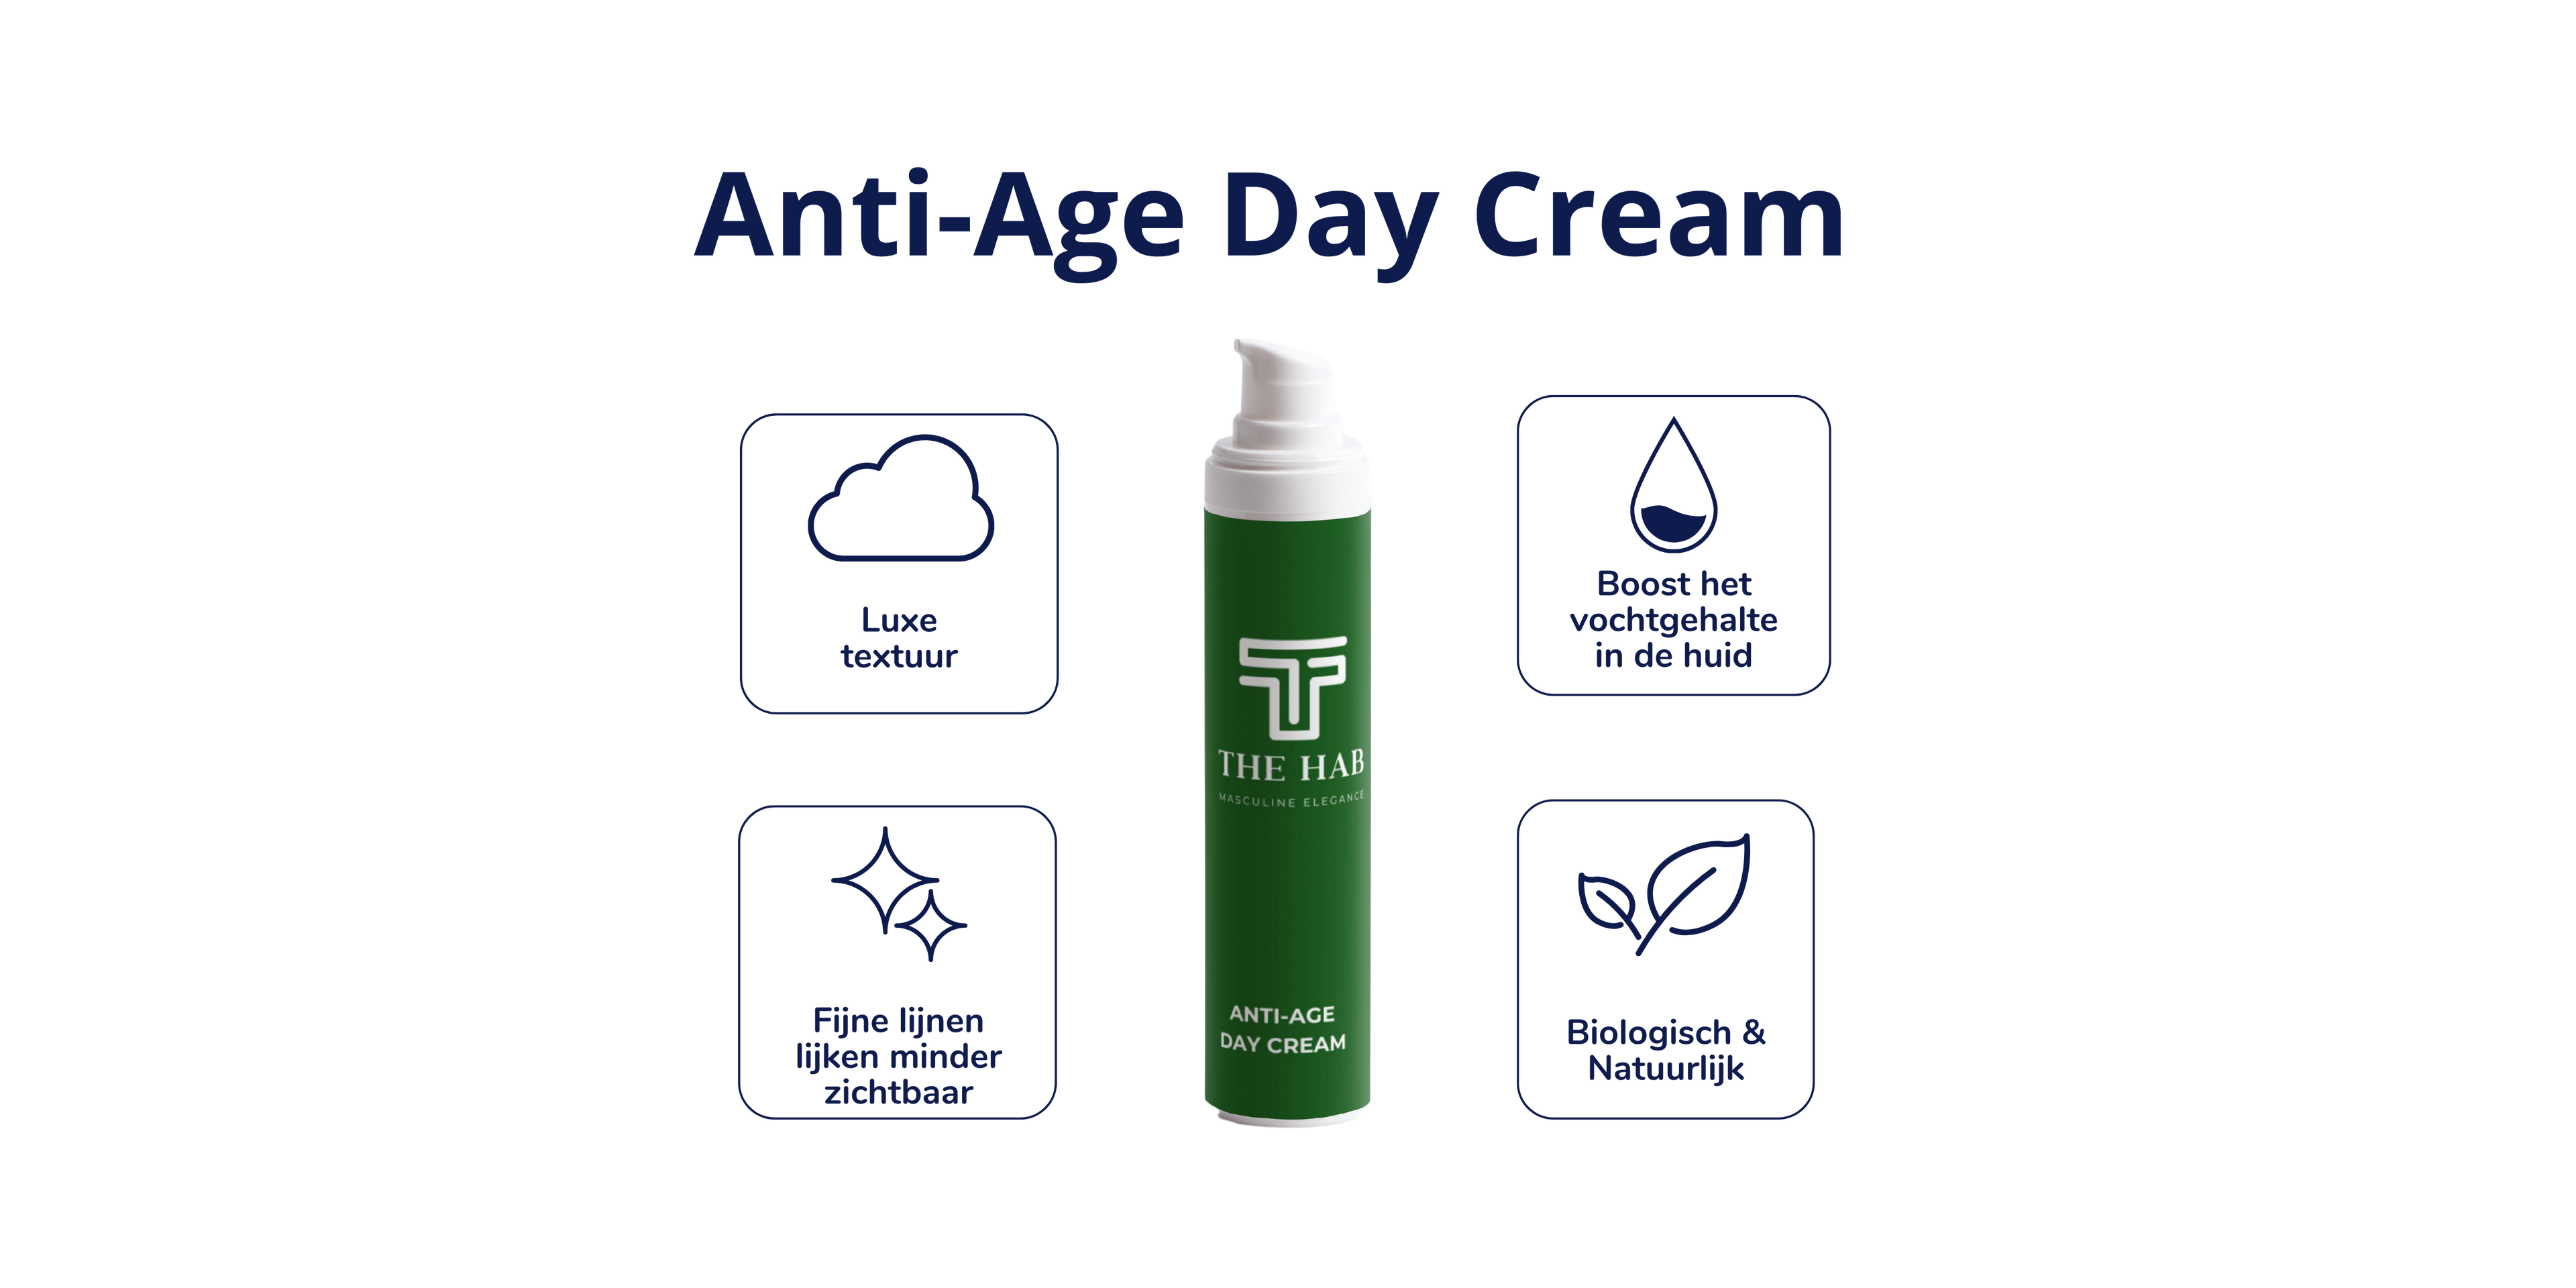 Anti Age Daycream banner with benefits